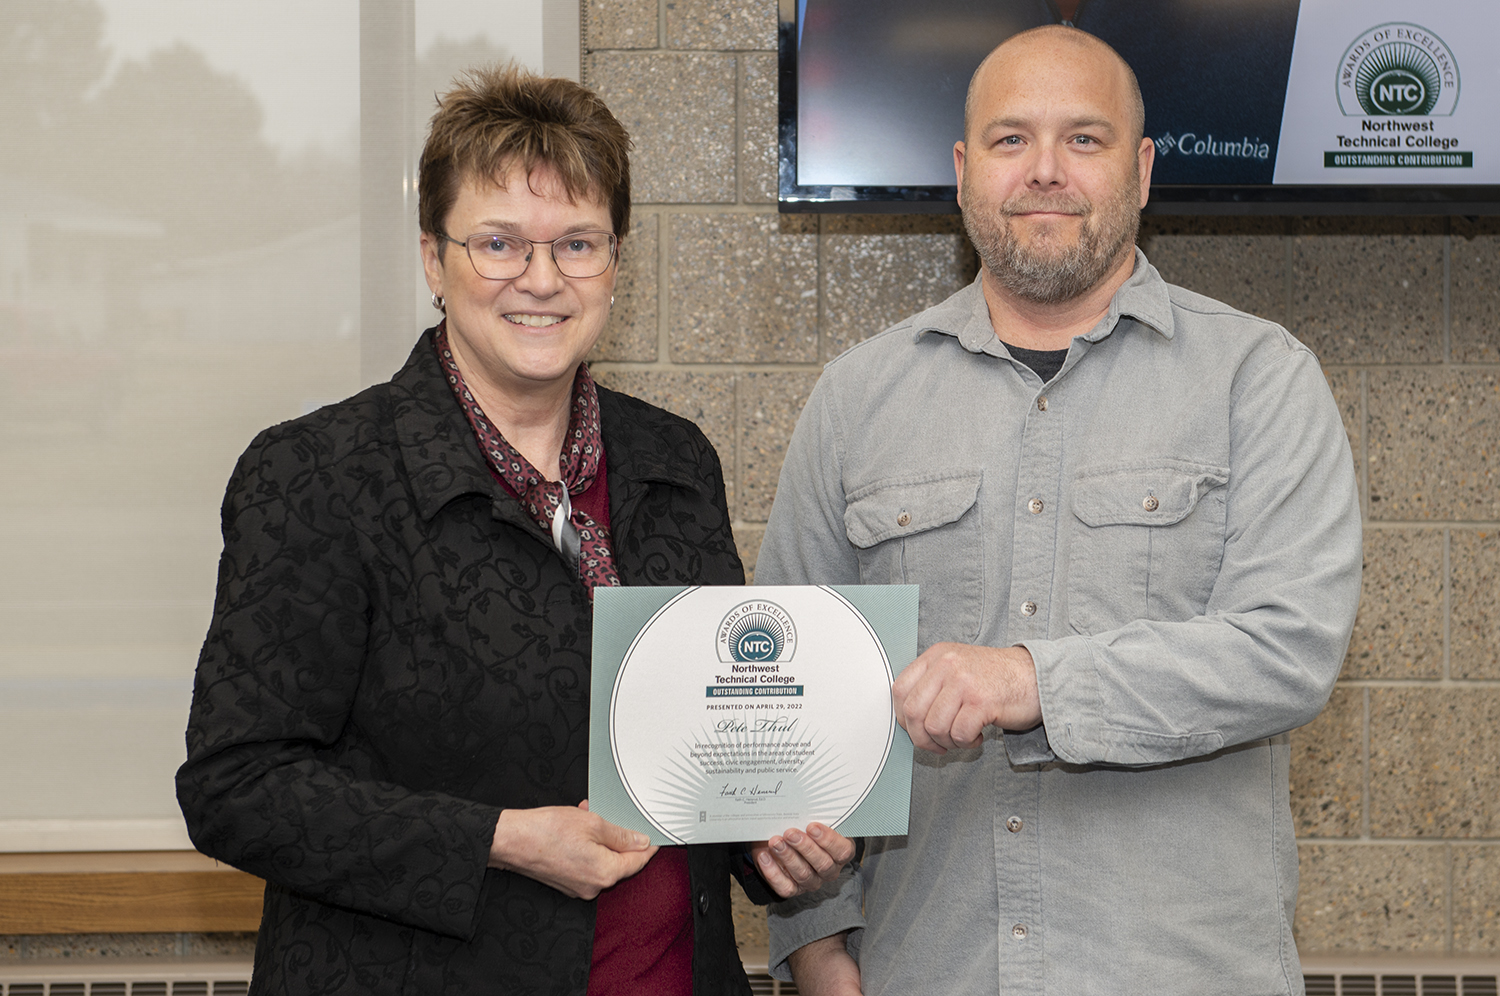 President Faith Hensrud presenting Peter Thul, electrical faculty, the Outstanding Contribution award.